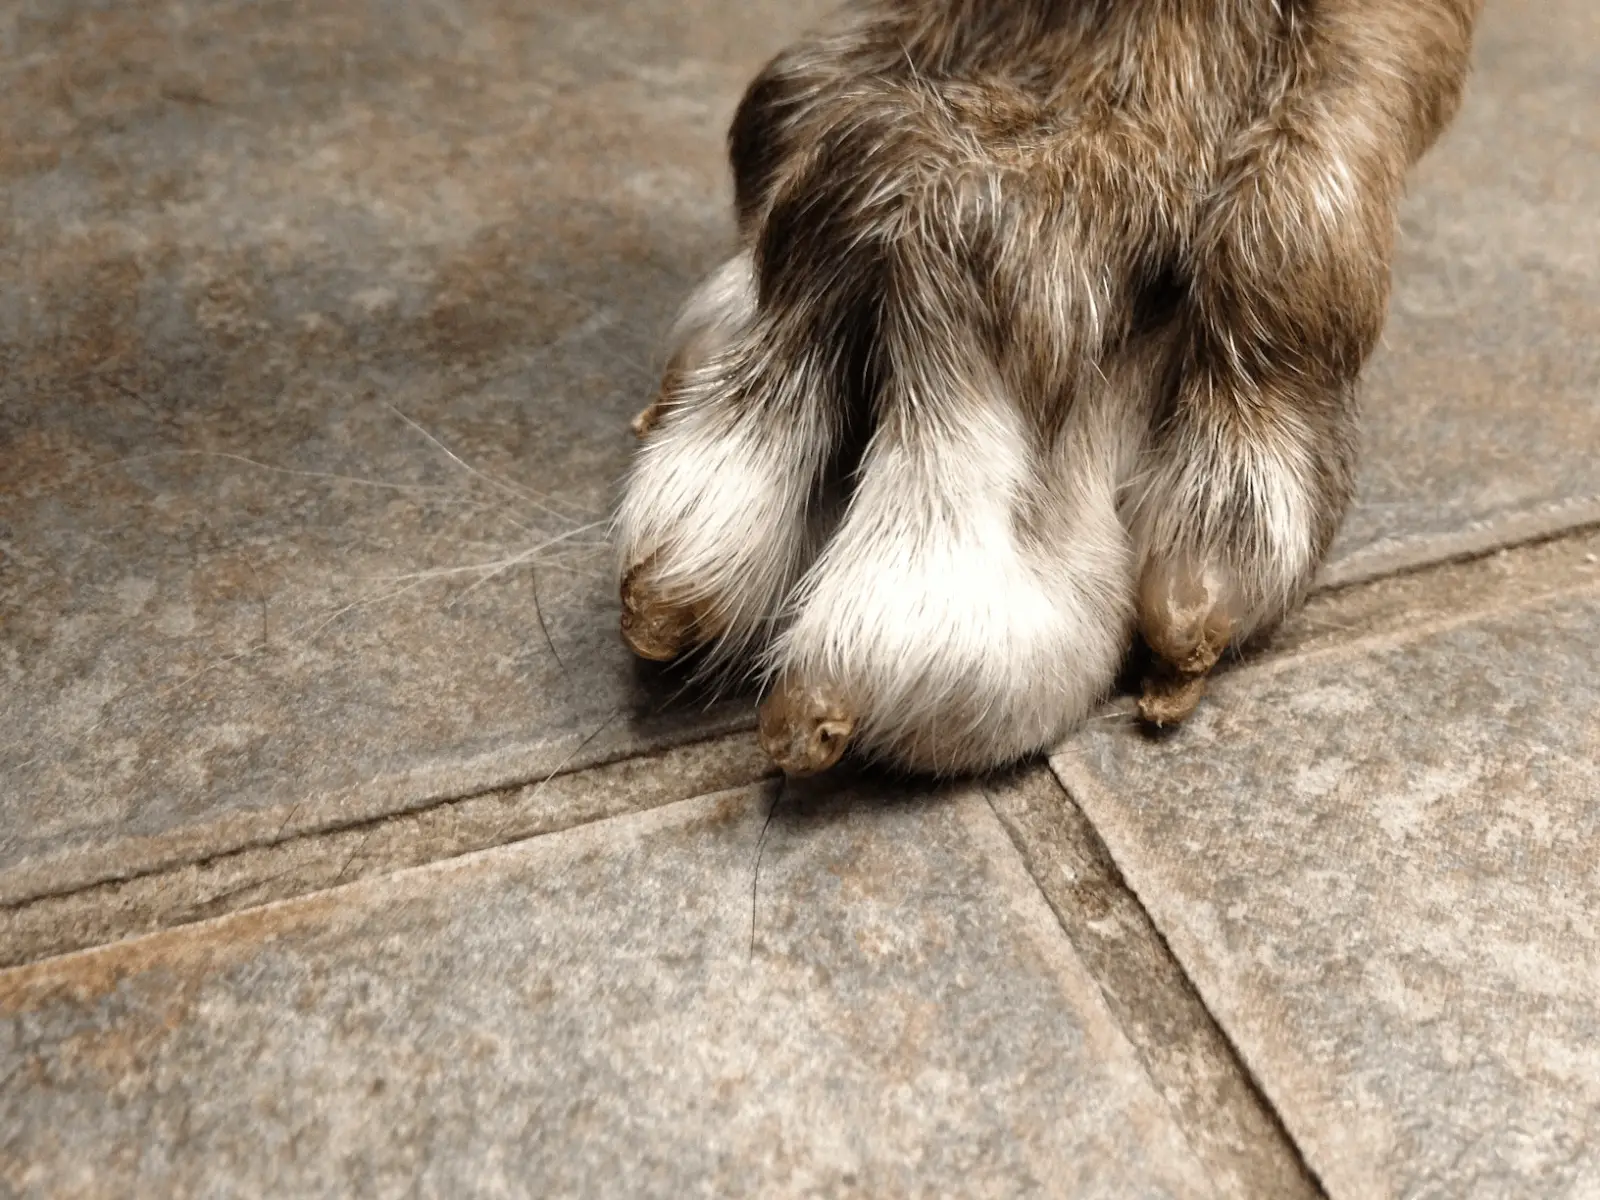 How to Keep Dog Nails Short Without Clipping?